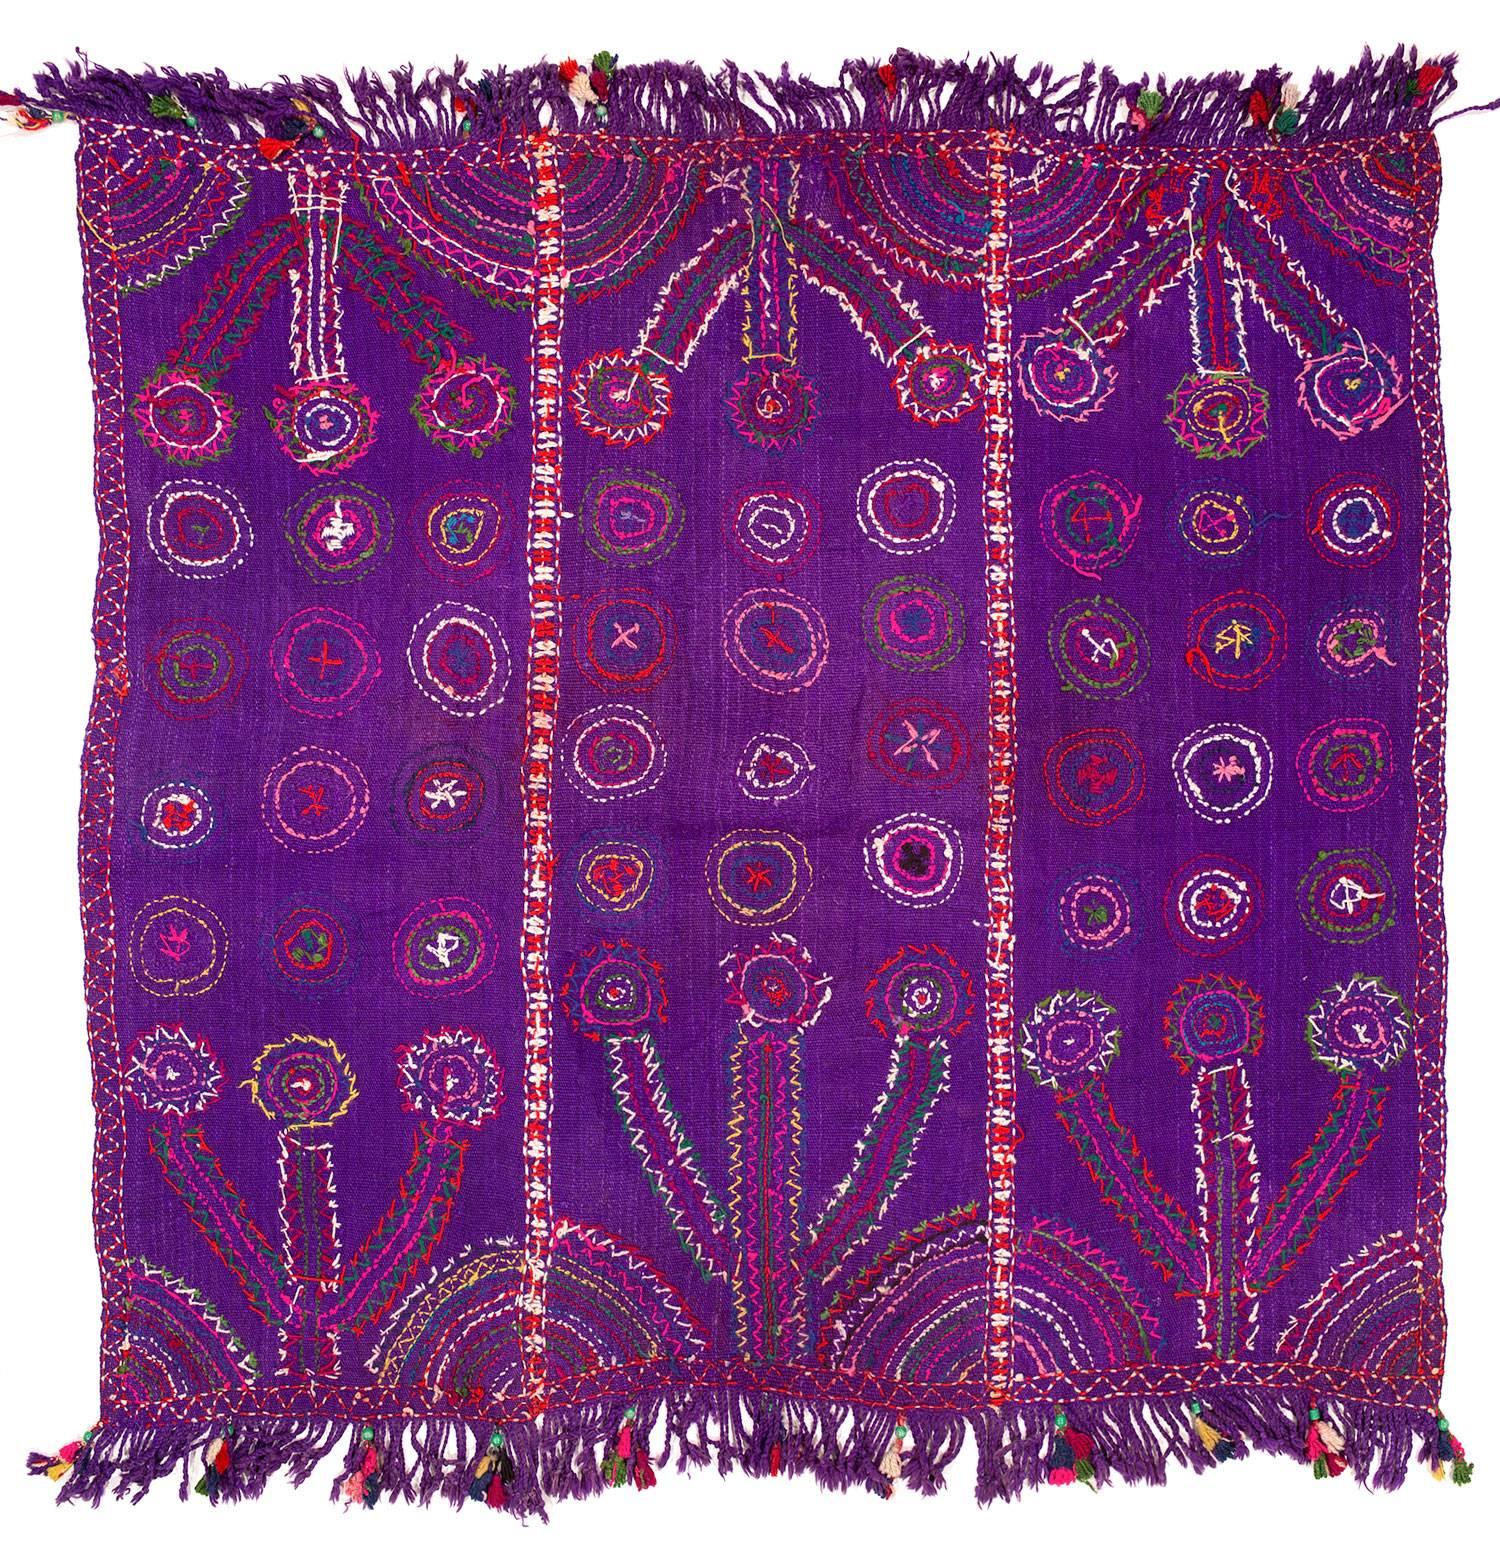 A beautiful hand embroidered textile from Turkey that is perhaps 30 or 40 years old. A whimsical example of textile Folk Art.